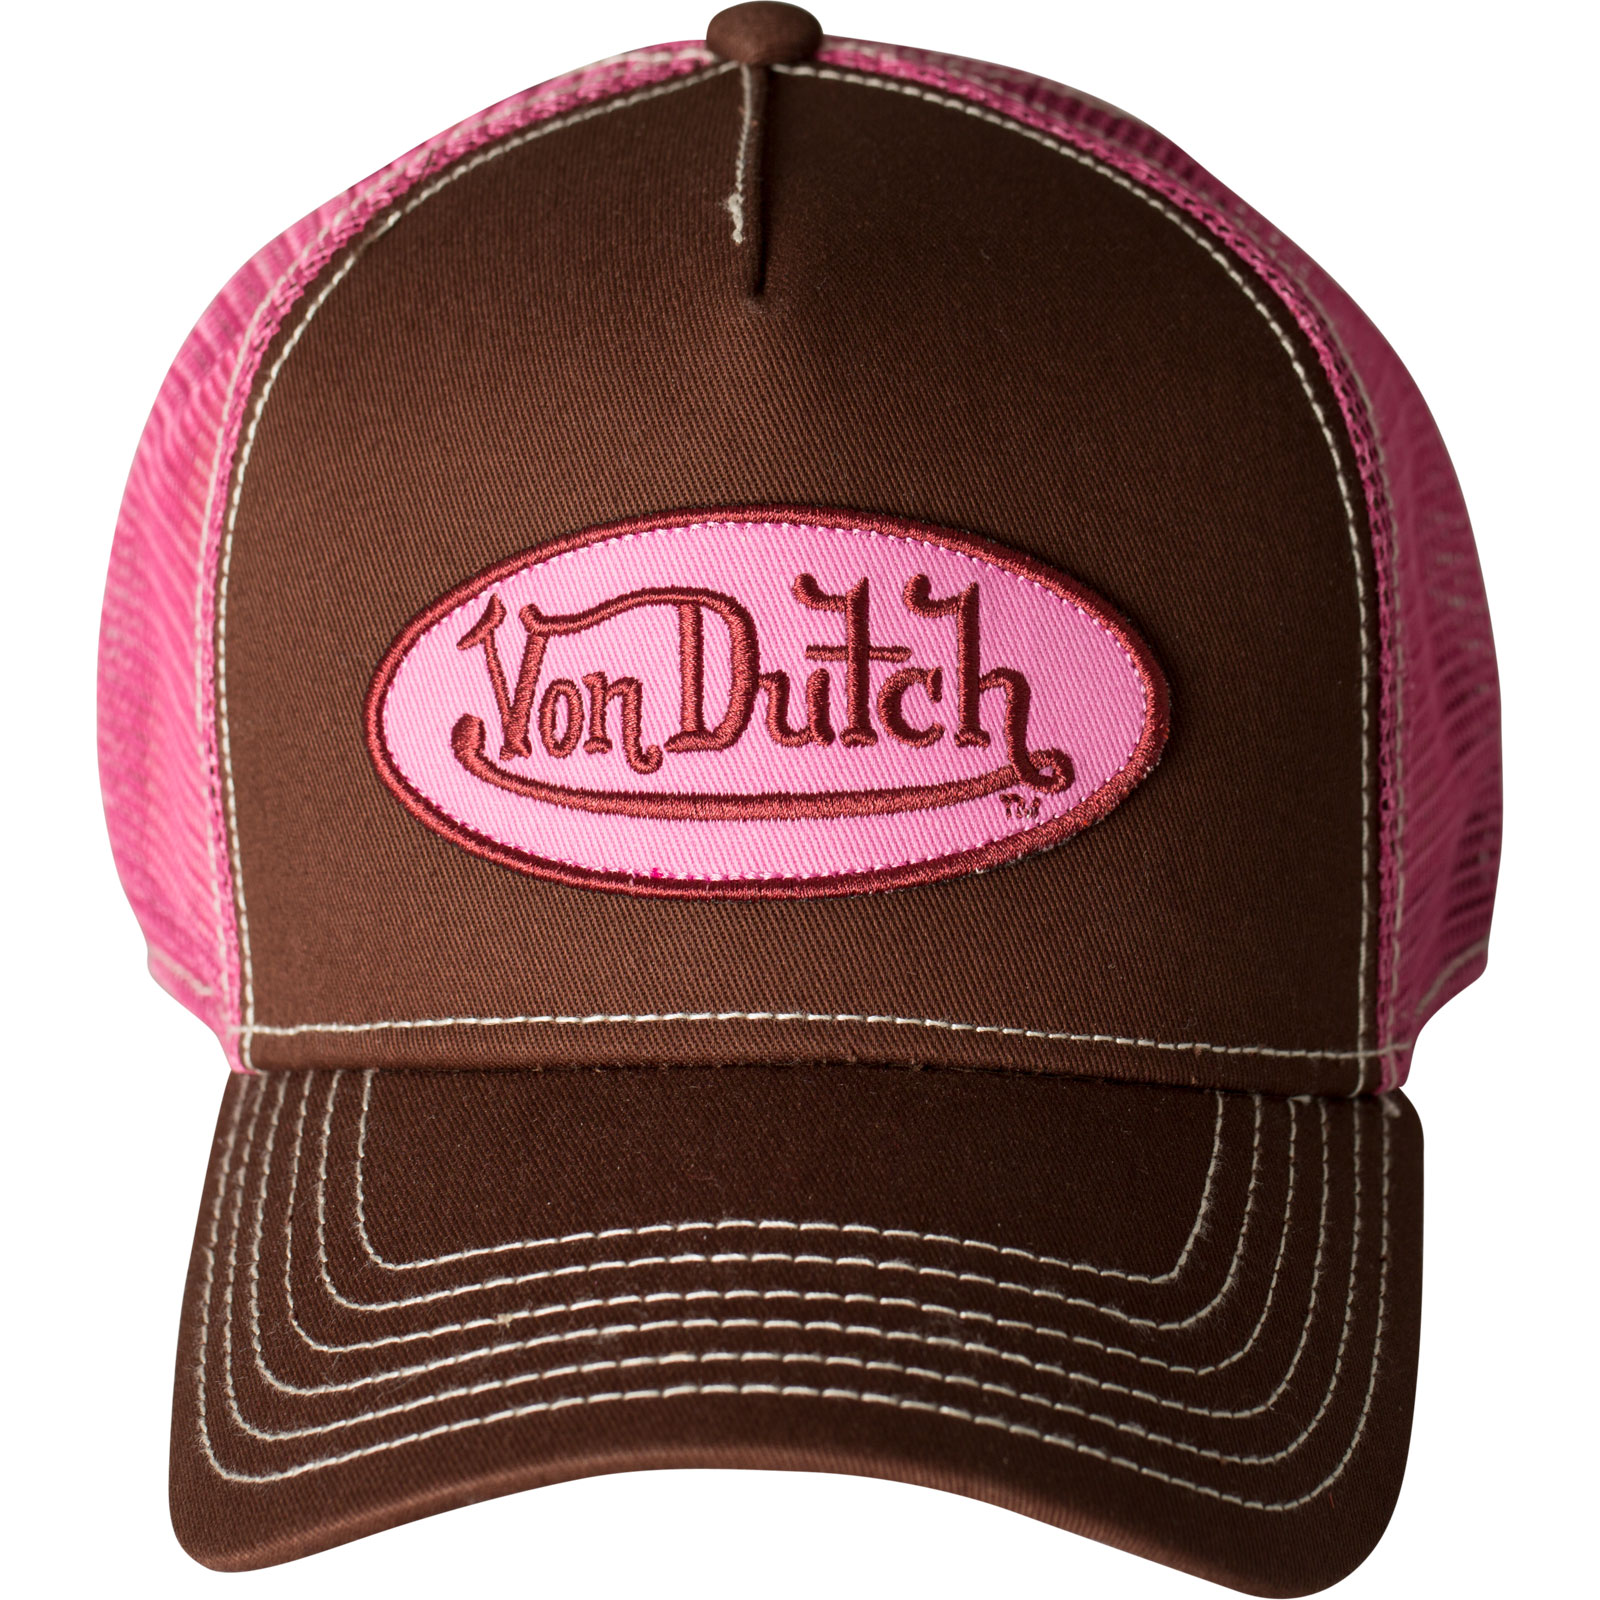 Von Dutch OG Trucker Cap with embroidered patch and midriff